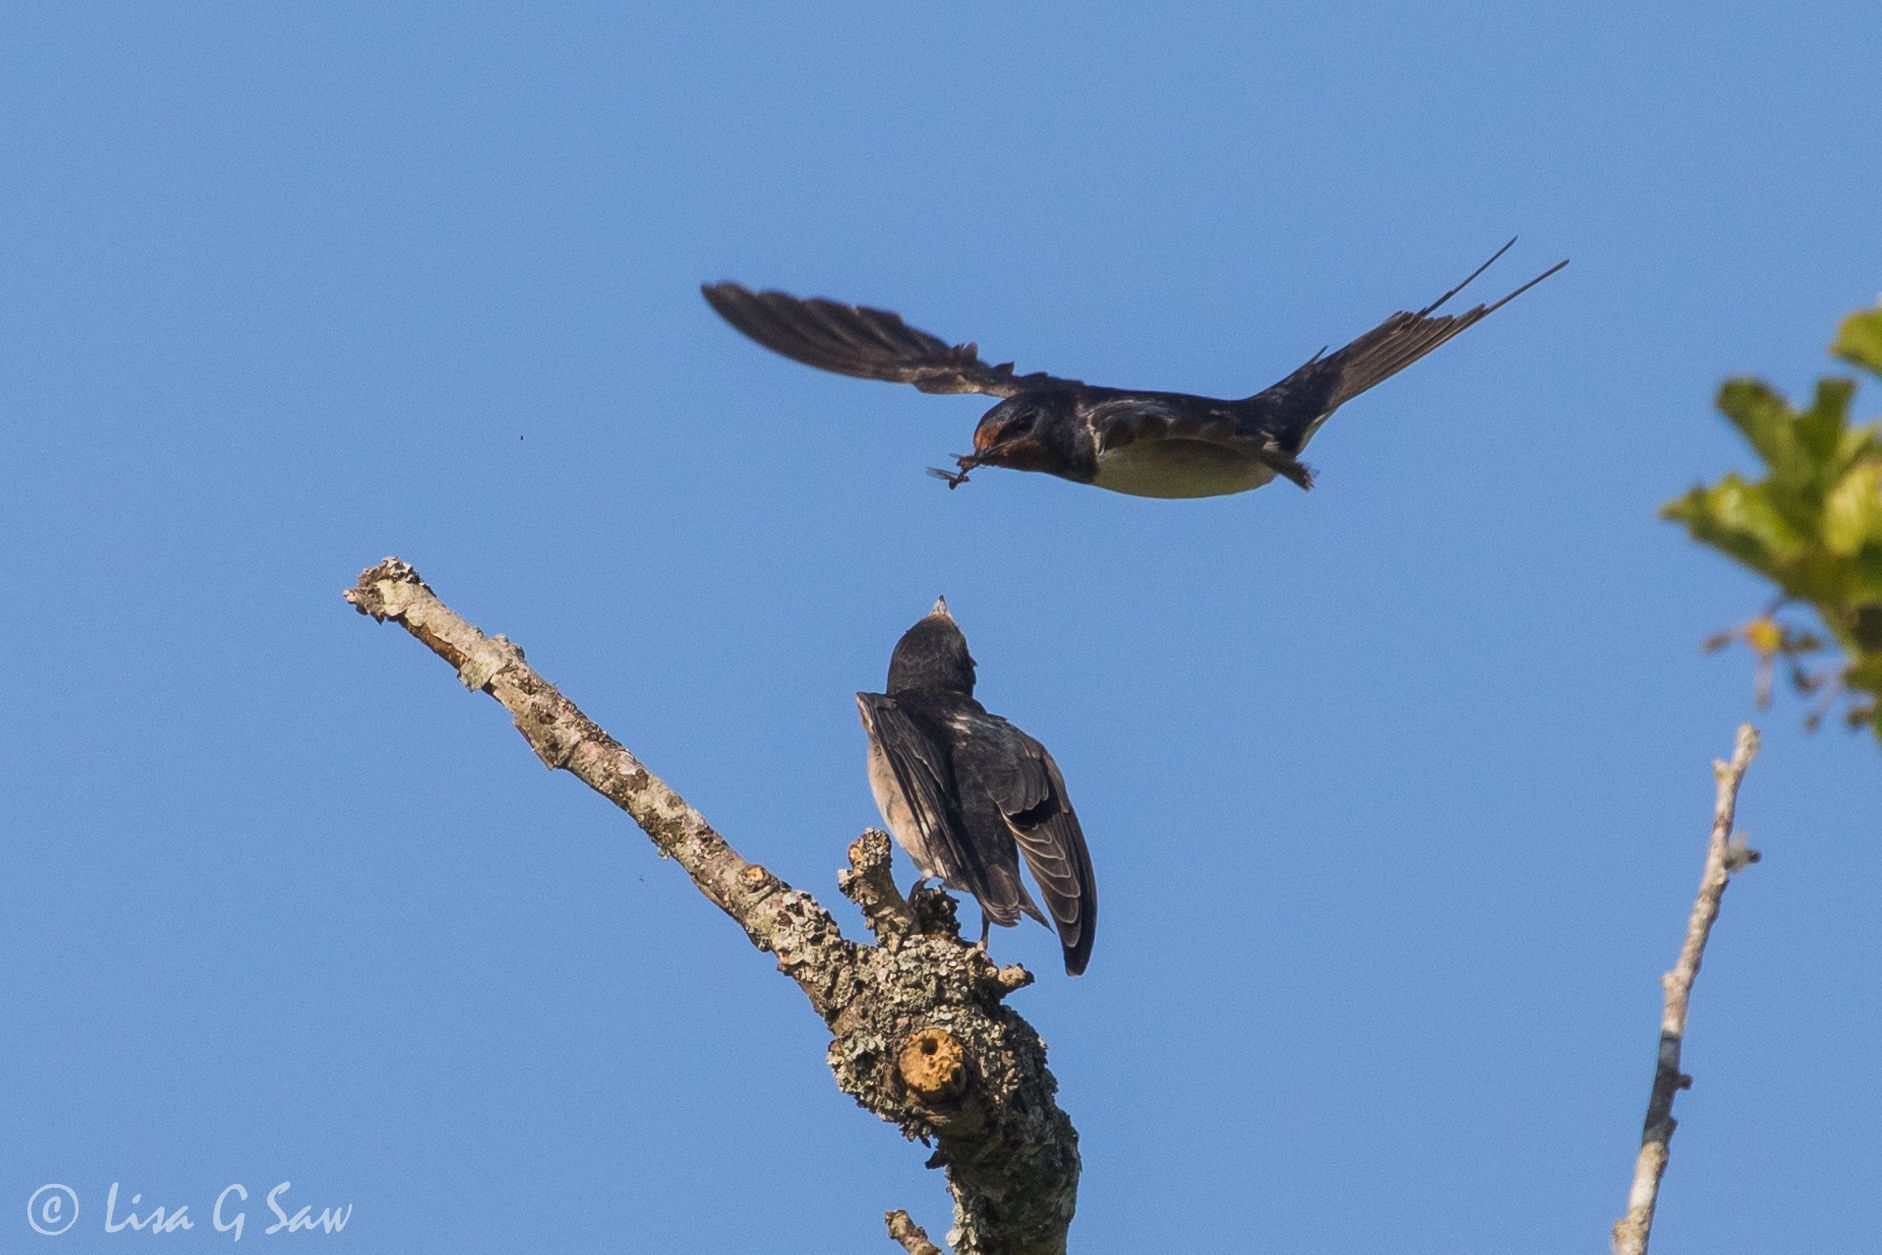 An adult swallow with insect in beak about to feed juvenile